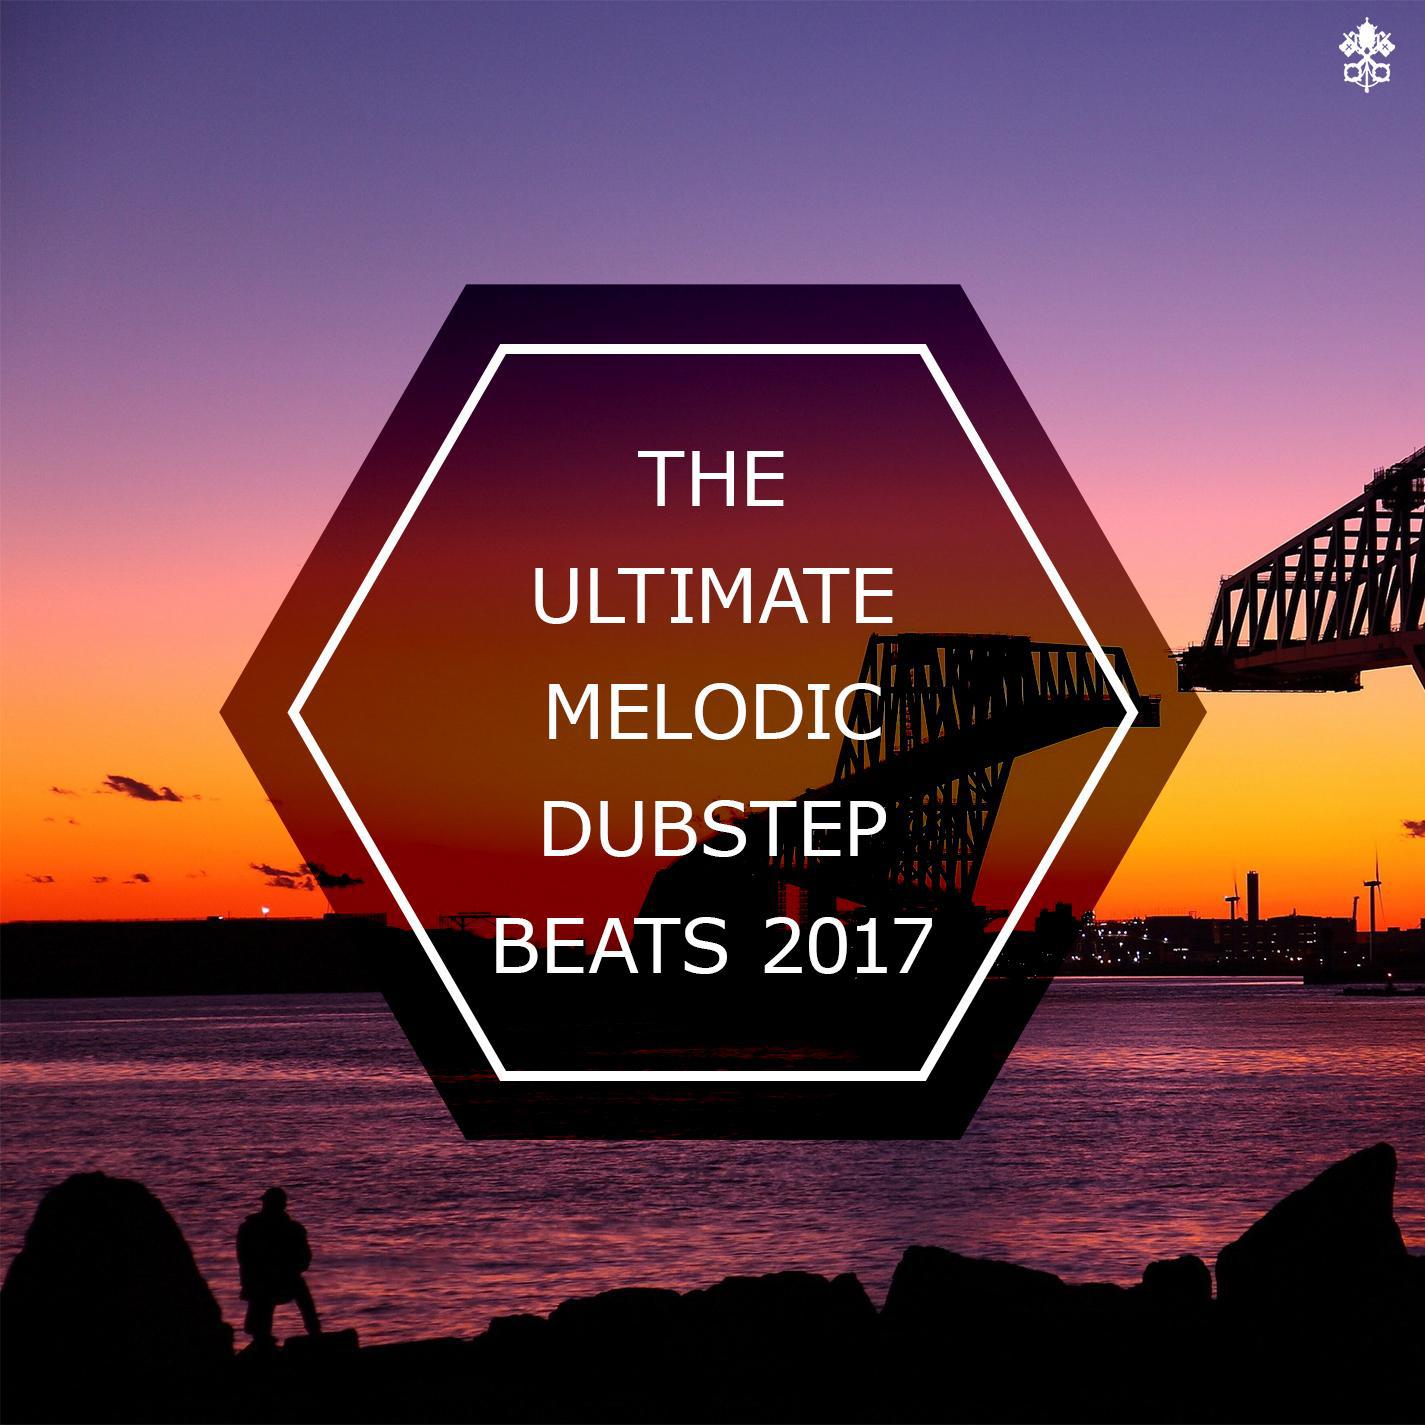 The Ultimate Melodic Dubstep Beats 2017